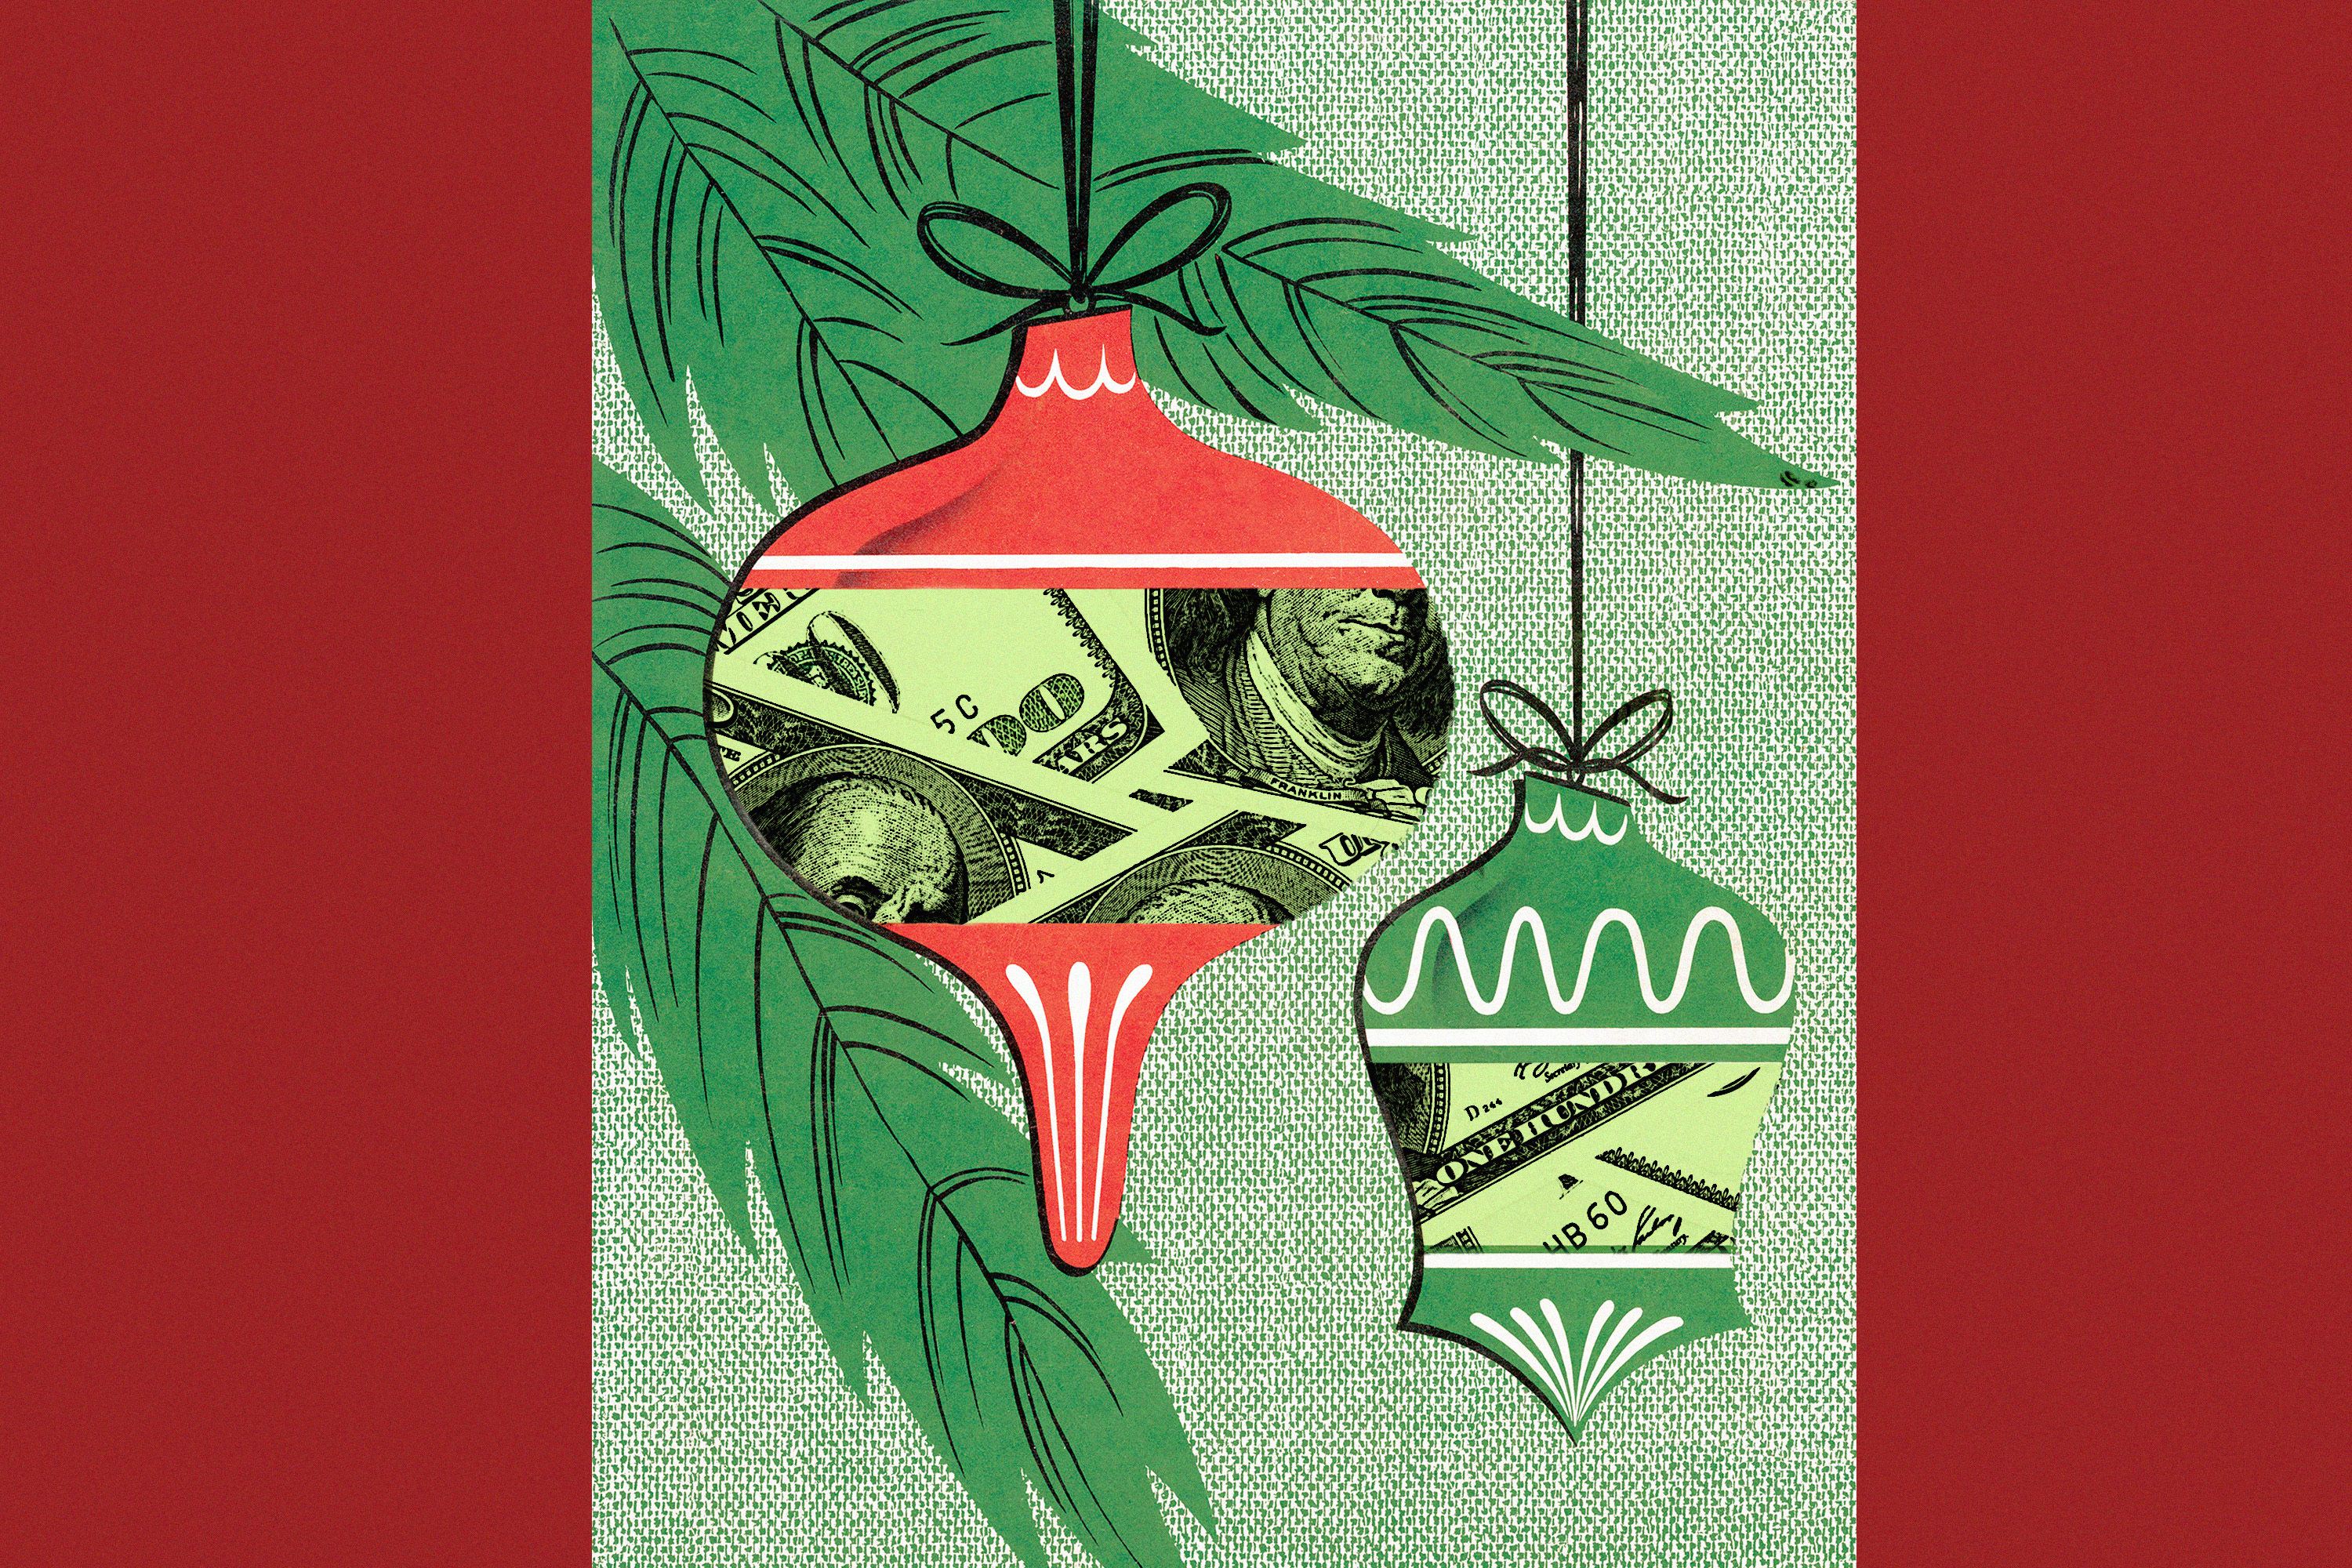 Illustration of two holiday ornaments wrapped in hundred dollar bills hanging from the branch of an evergreen tree.